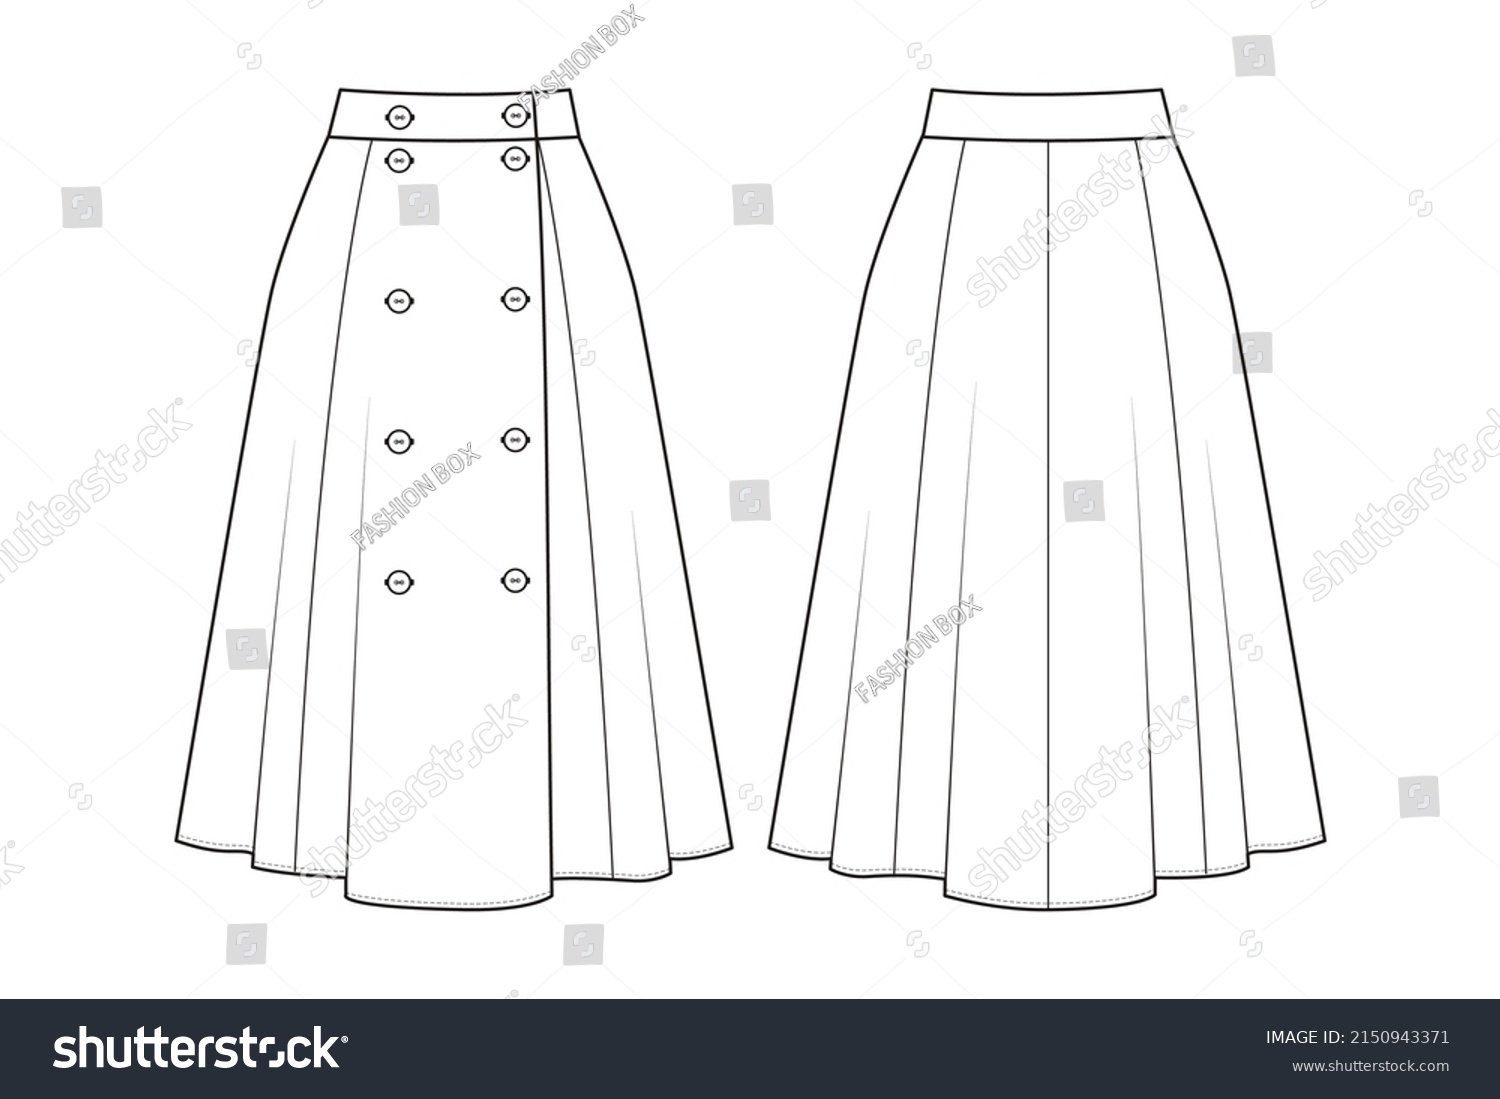 Fashion Technical Drawing Flared Doublebreasted Midi Stock Vector ...